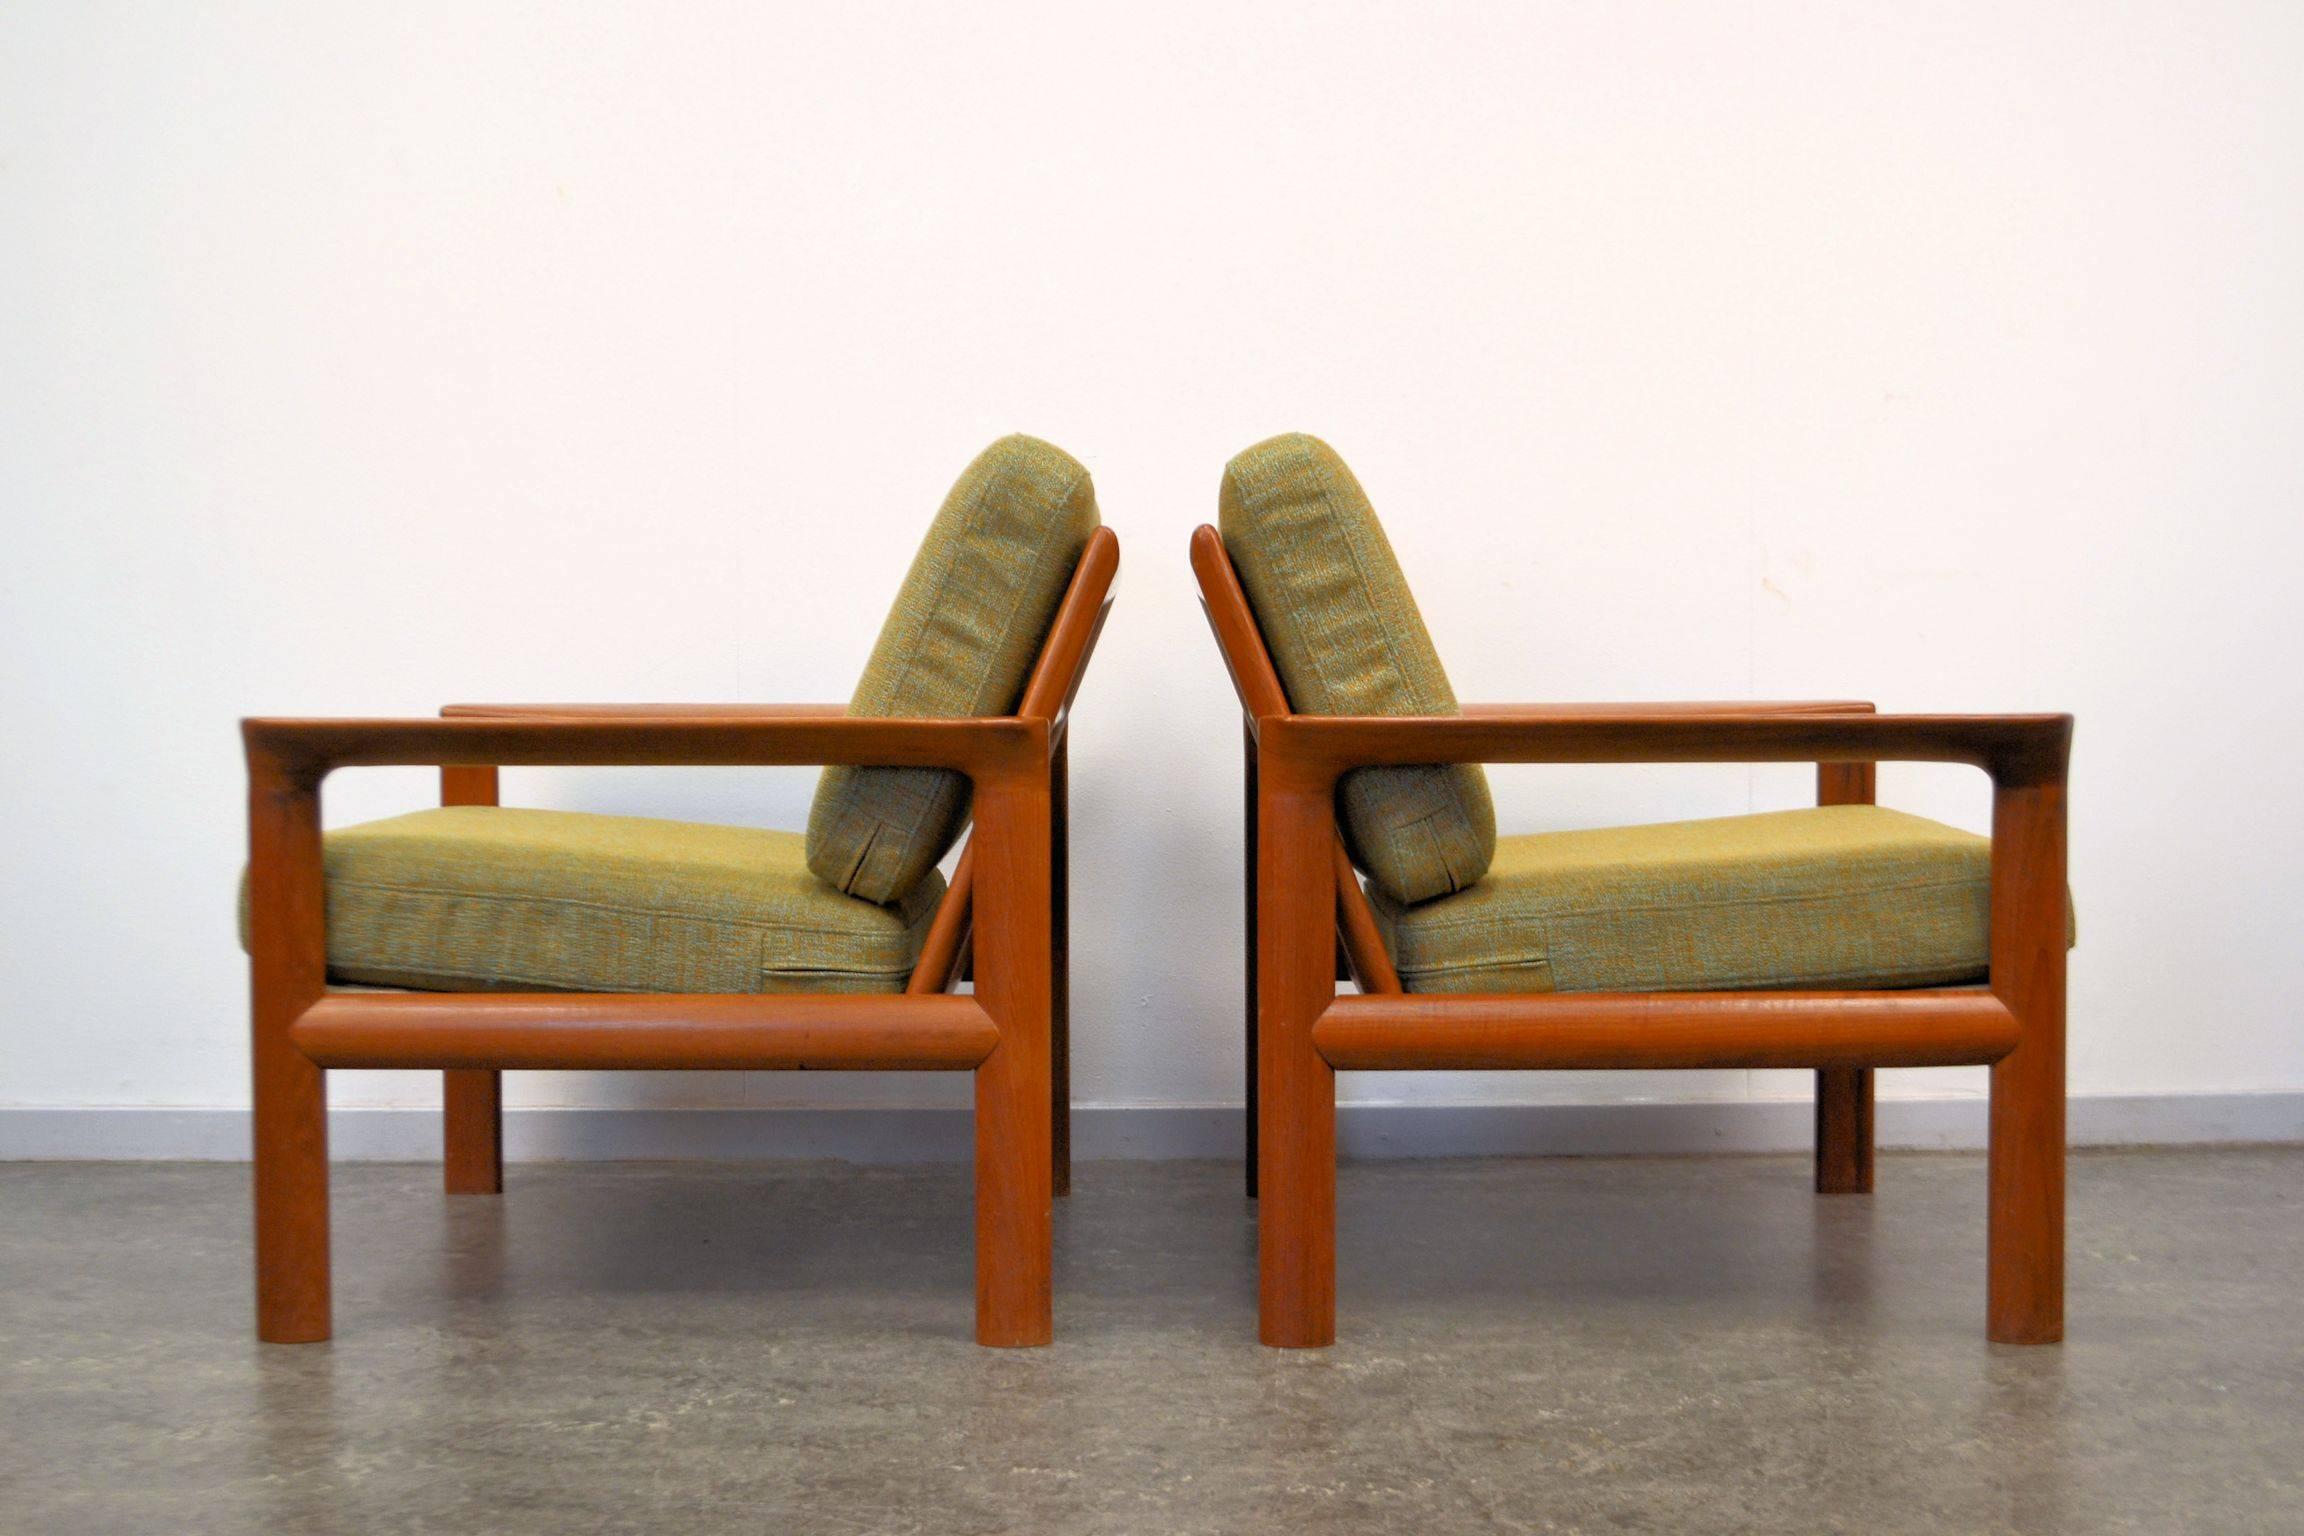 Stylish Danish modern design easy chairs designed in the 1960s by Sven Ellekaer for manufacturer Komfort. Featuring characteristic Danish modern design and quality, solid teak frames and easy to remove new upholstery. Create a stunning vintage